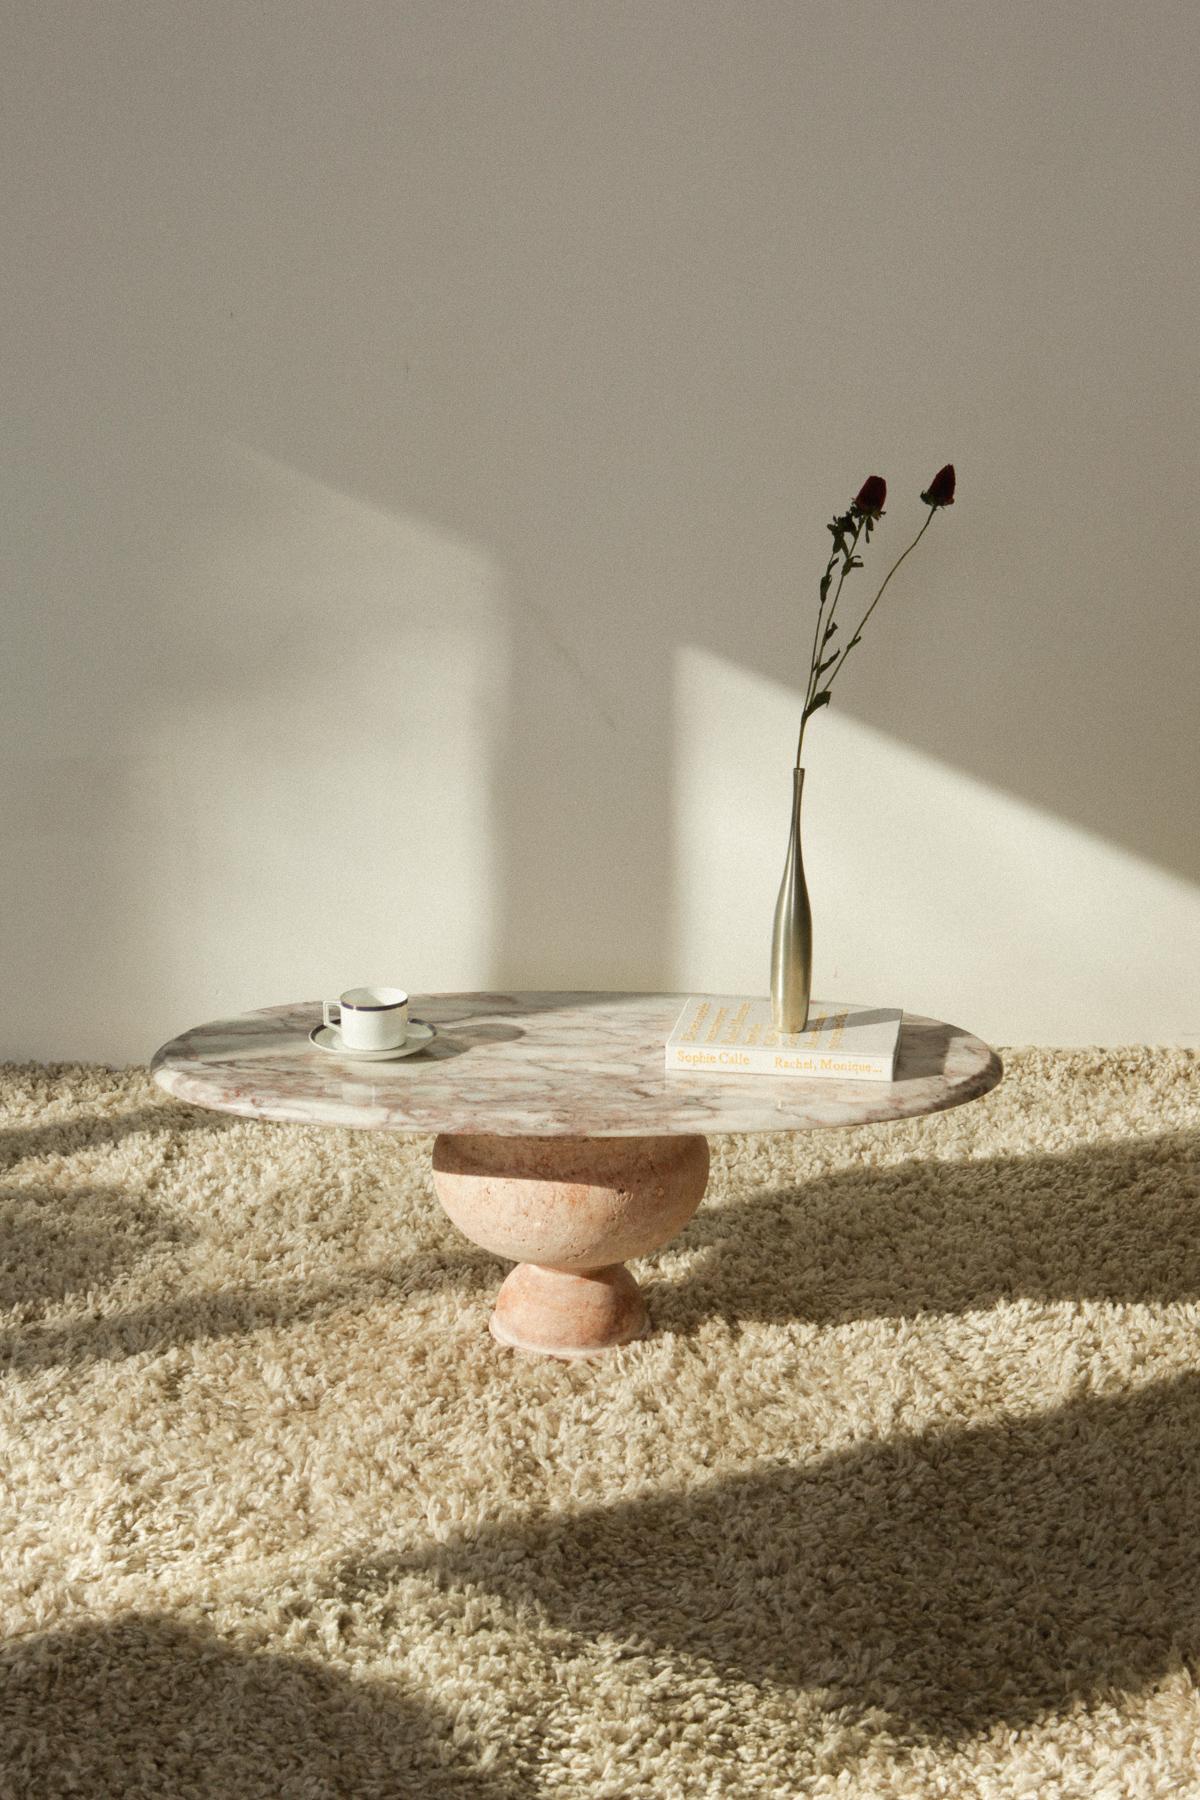 This piece was created by NVT Studio from the highest quality remnant stone, and is the only one in existence. Threads of pink layer with white and silver hued marble on this oval shaped table top creating a romantic, soft feel. The base is made of